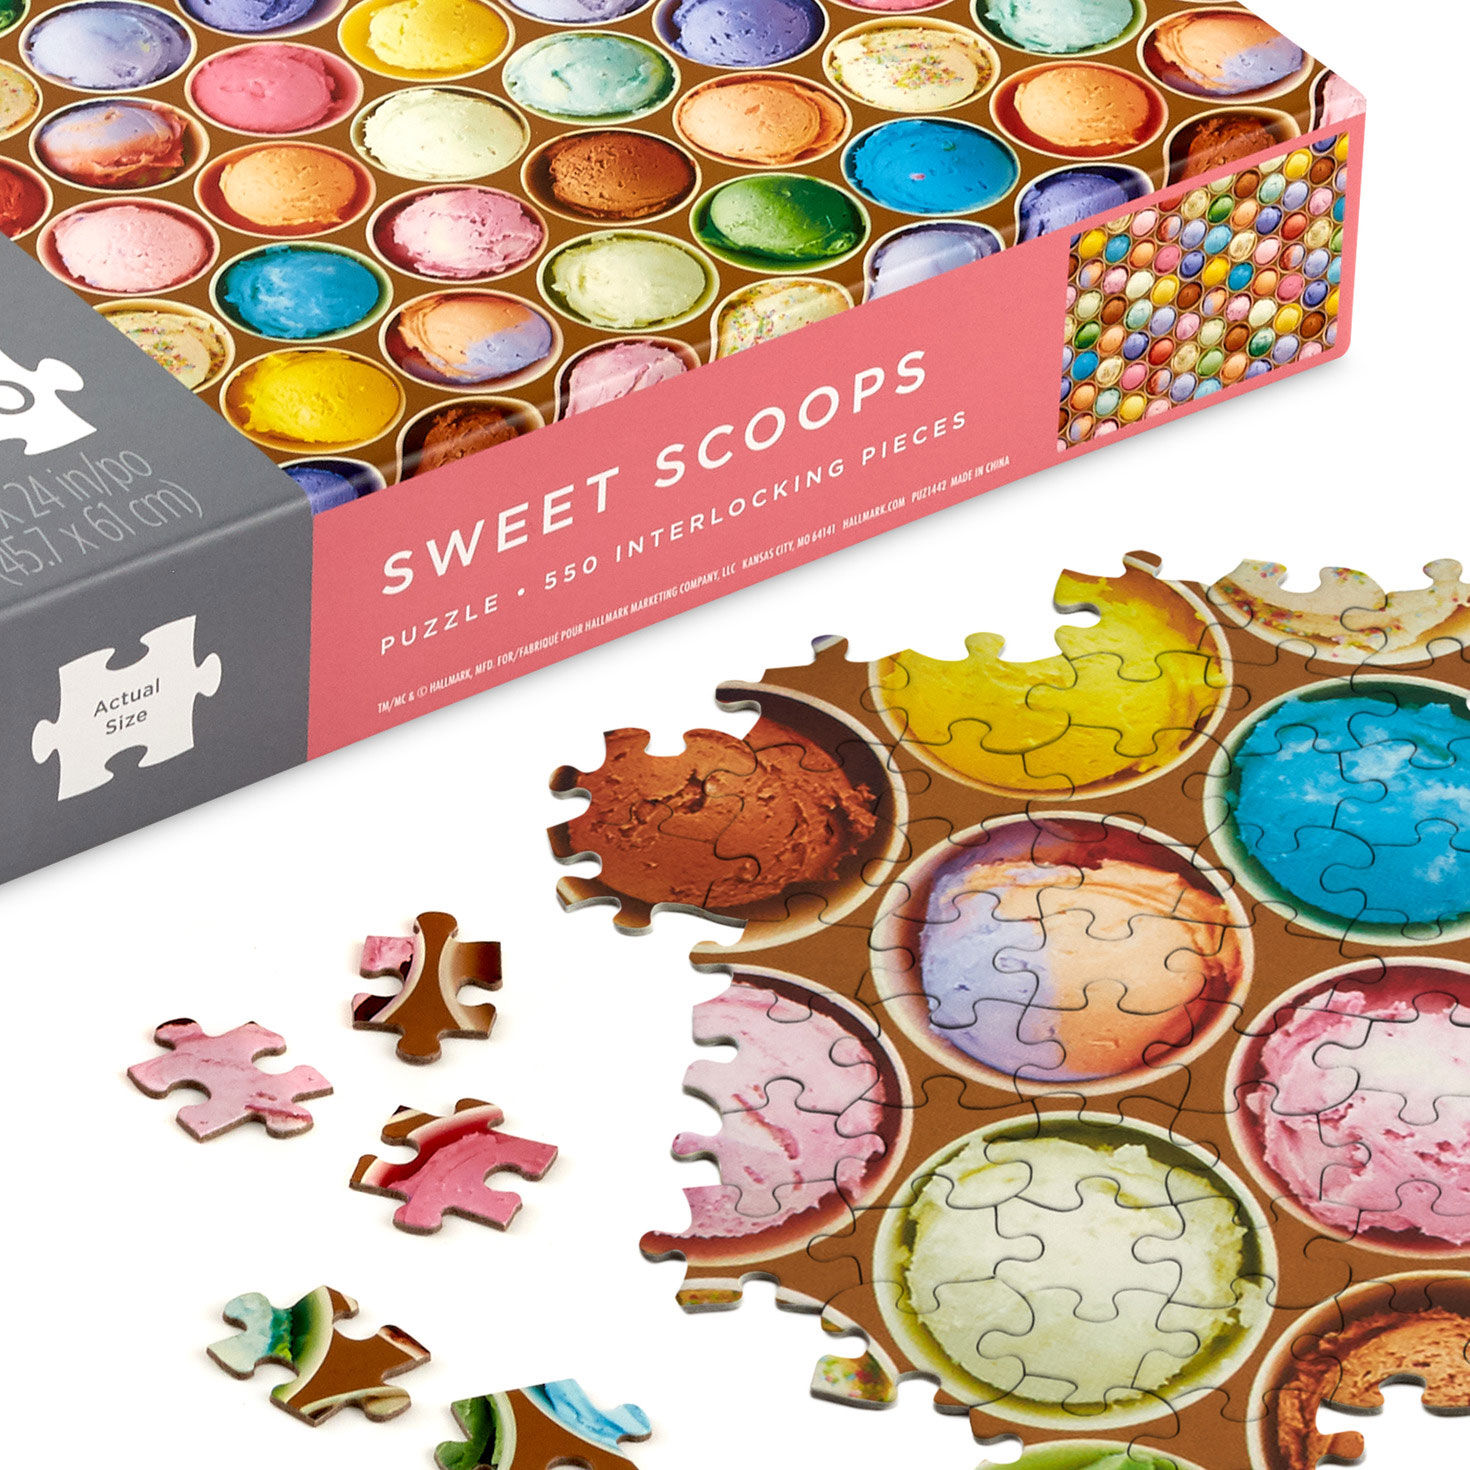 Sweet Scoops 550-Piece Jigsaw Puzzle for only USD 14.99 | Hallmark